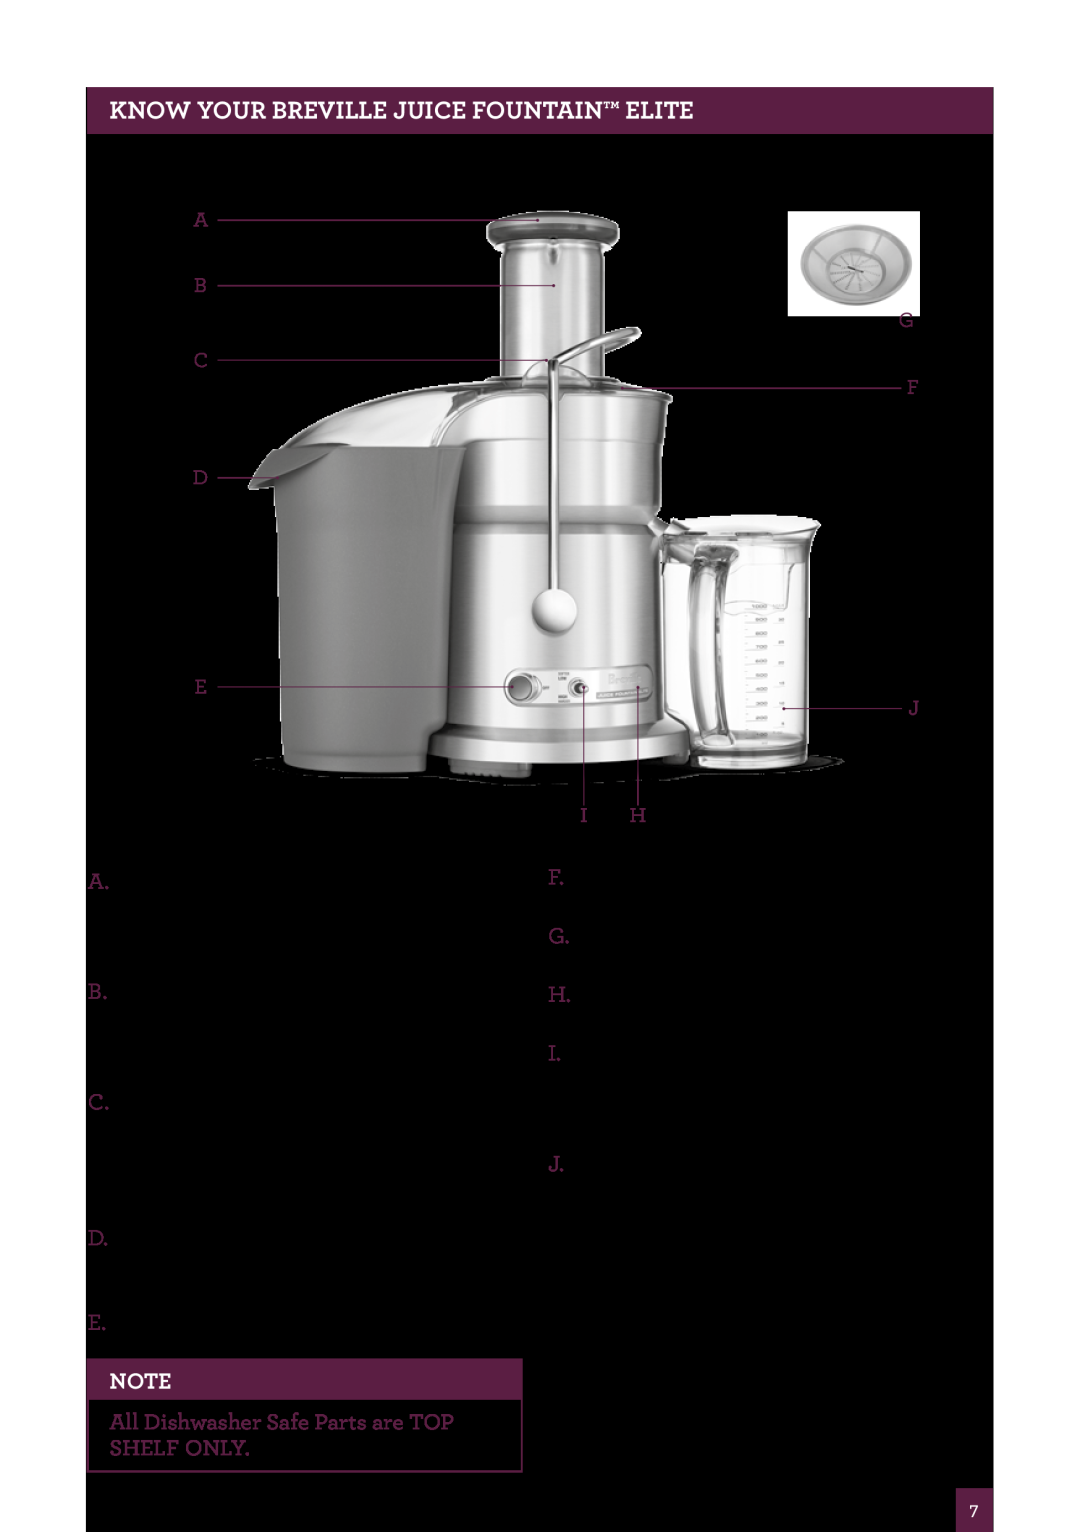 Breville 800JEXL manual KNOW your Breville Juice Fountain Elite 